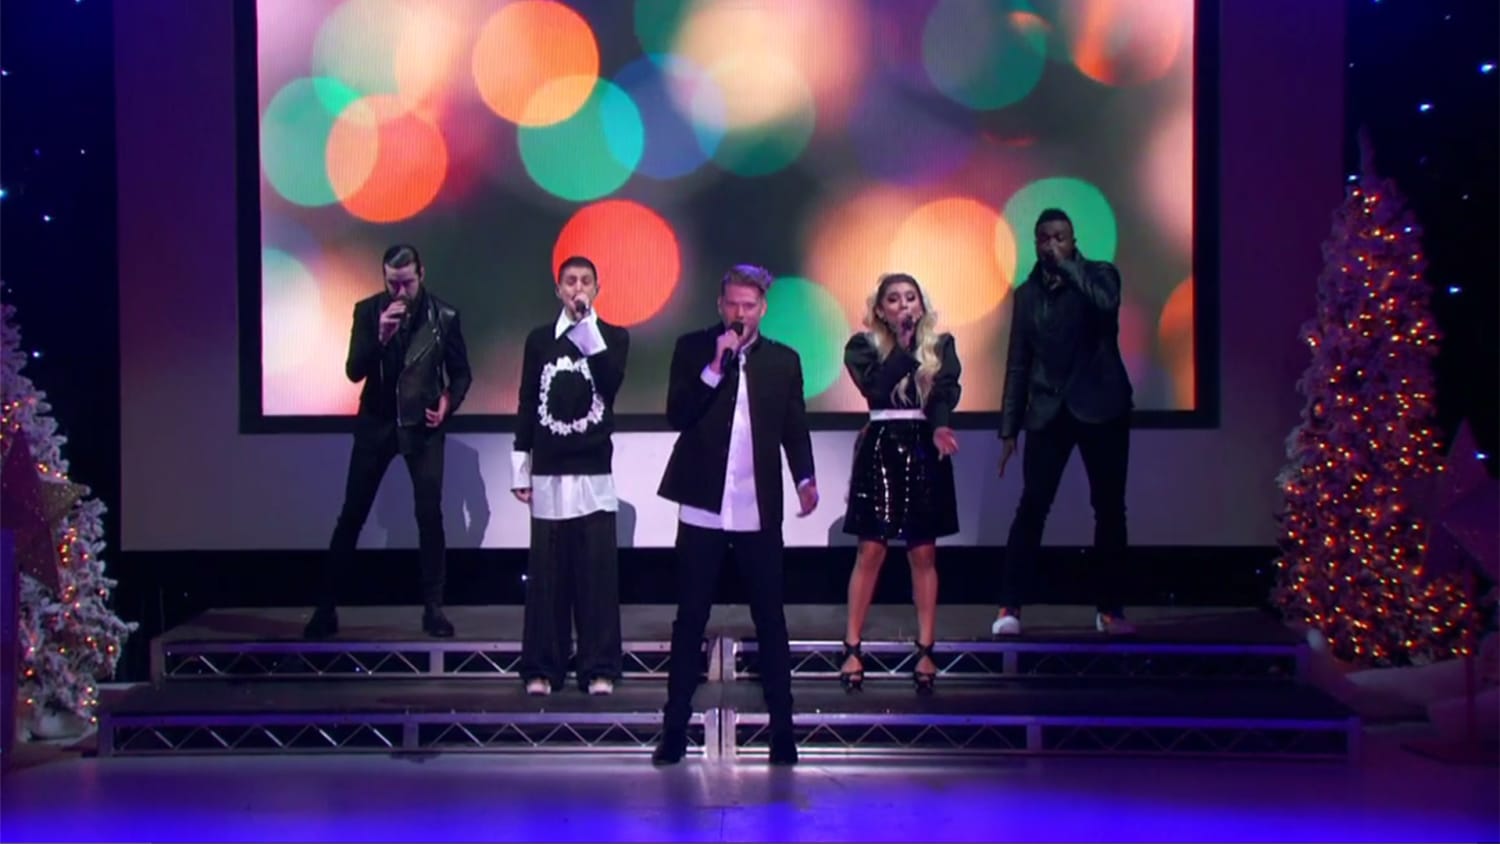 'Pentatonix Christmas' preview: See group perform 'Joy To The World' - TODAY.com